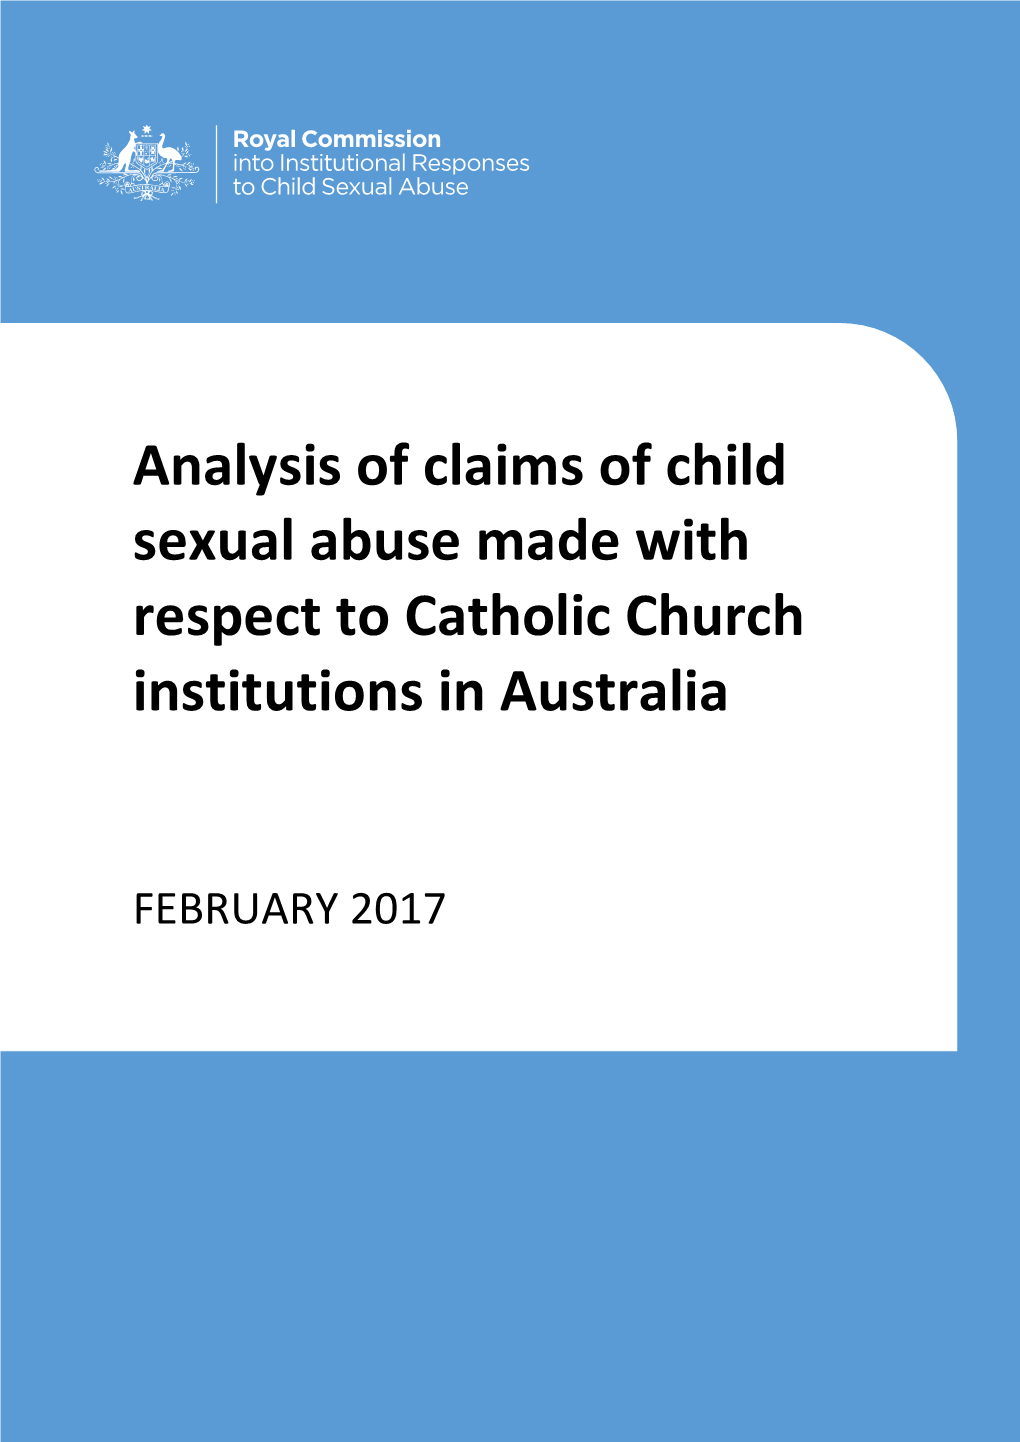 Analysis of Claims of Child Sexual Abuse Made with Respect to Catholic Church Institutions in Australia